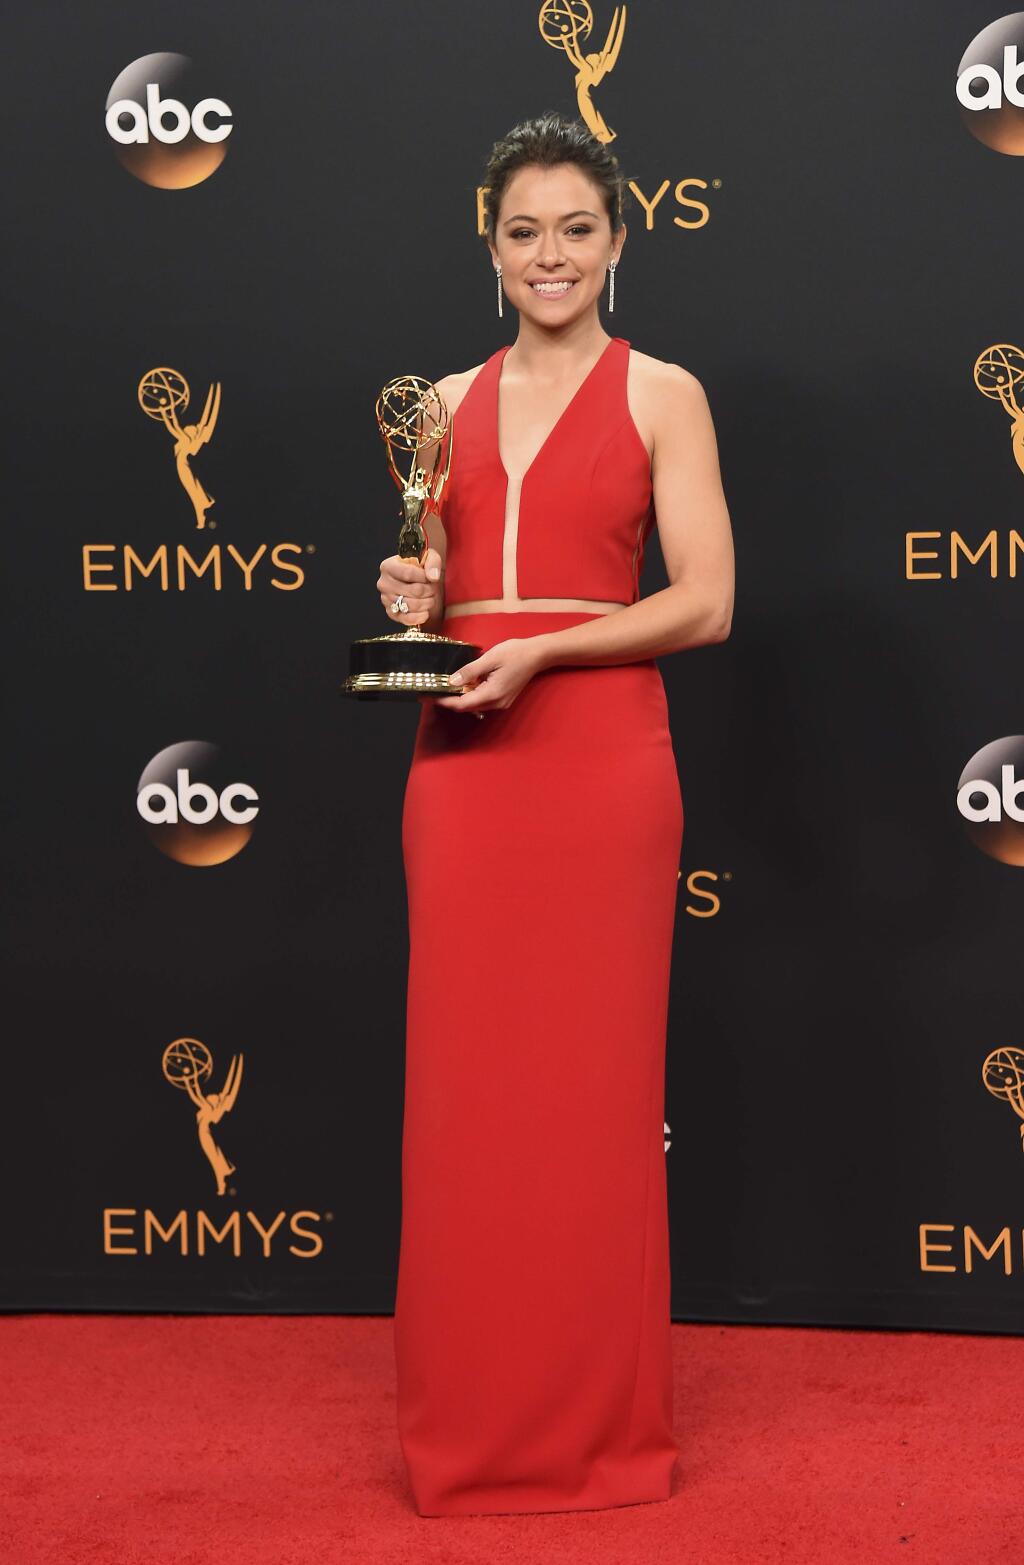 Tatiana Maslany winner of the award for outstanding lead actress in a drama series for Orphan Black poses in the press room at the 68th Primetime Emmy Awards on Sunday, Sept. 18, 2016, at the Microsoft Theater in Los Angeles. (Photo by Jordan Strauss/Invision/AP)